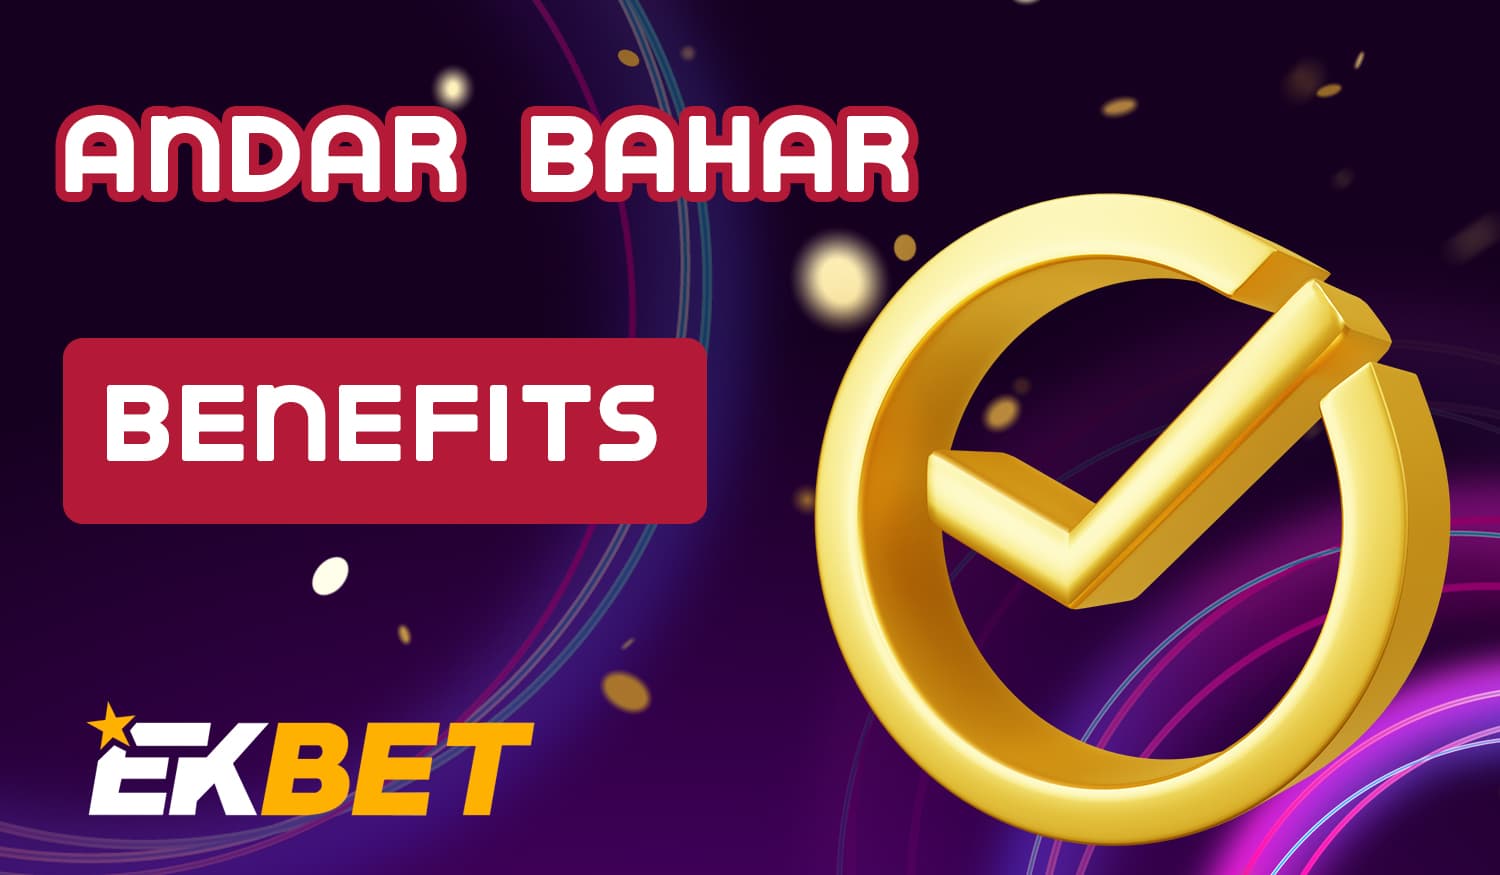 Why Ekbet users from India should try Andar Bahar on this site